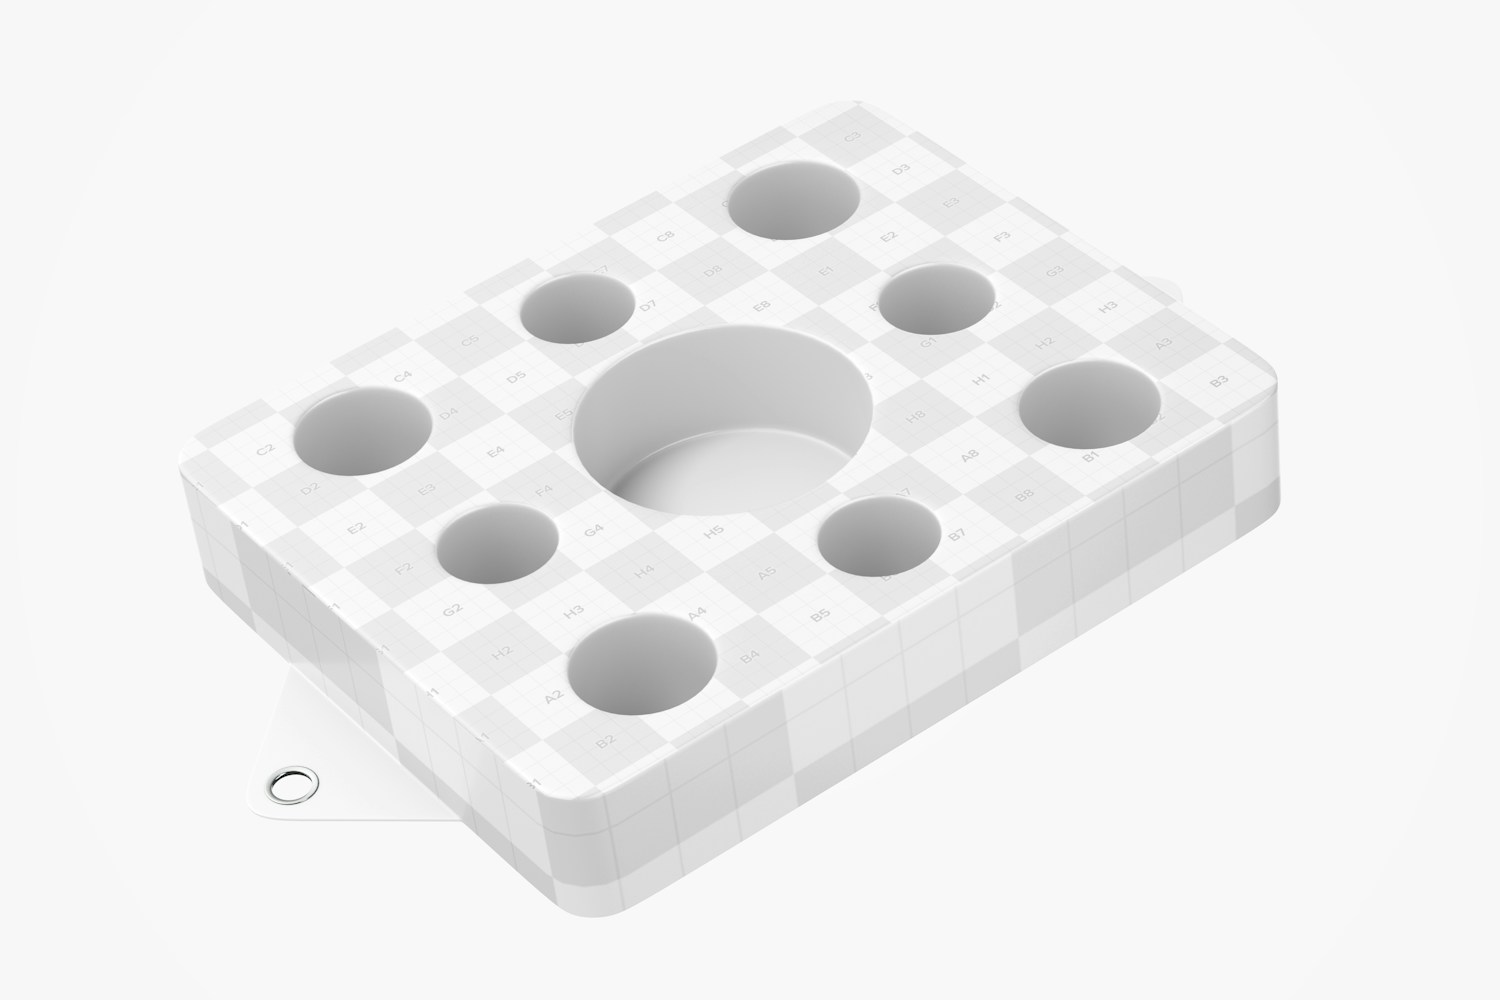 Pool Floating Drink Tray Mockup, Top View